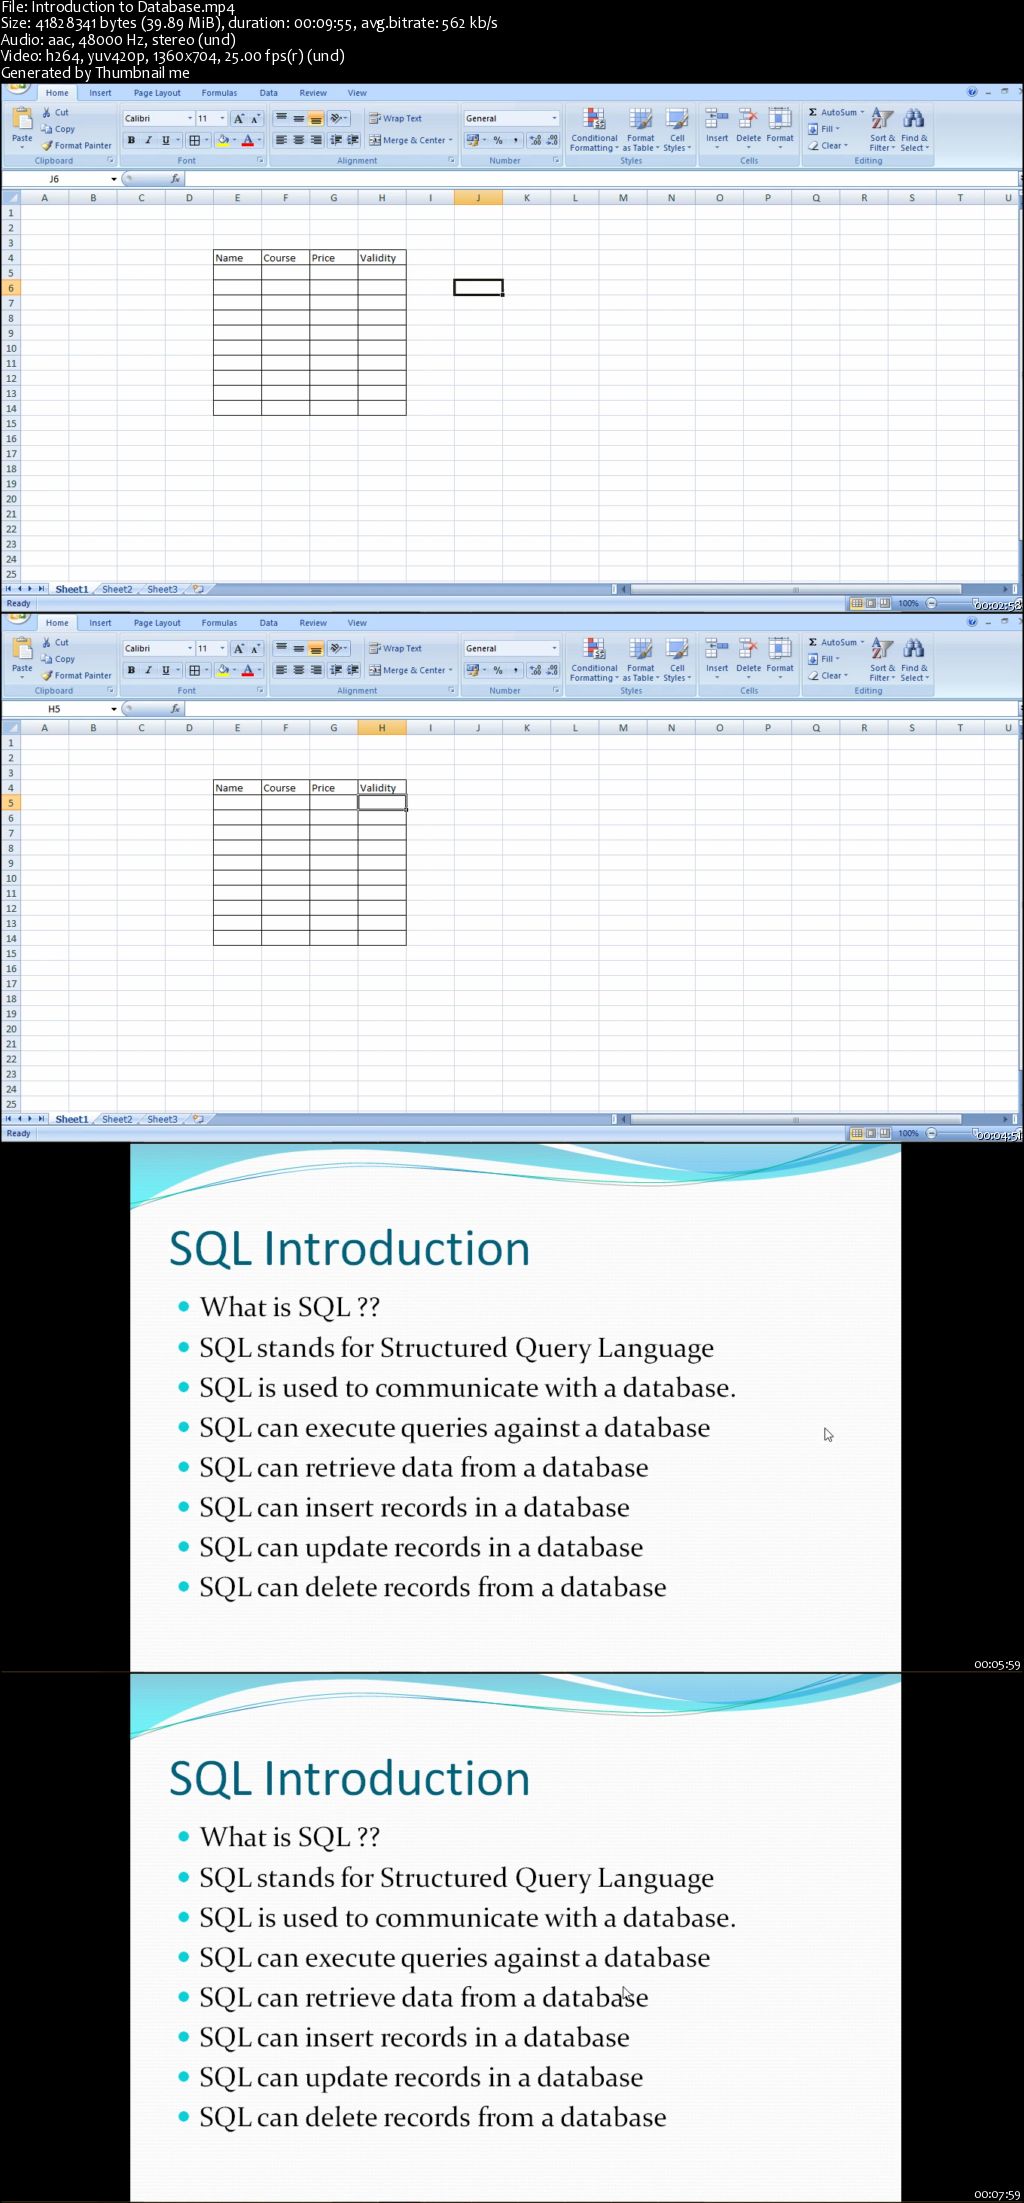 Learn SQL and Database Testing from Scratch+ Unix material